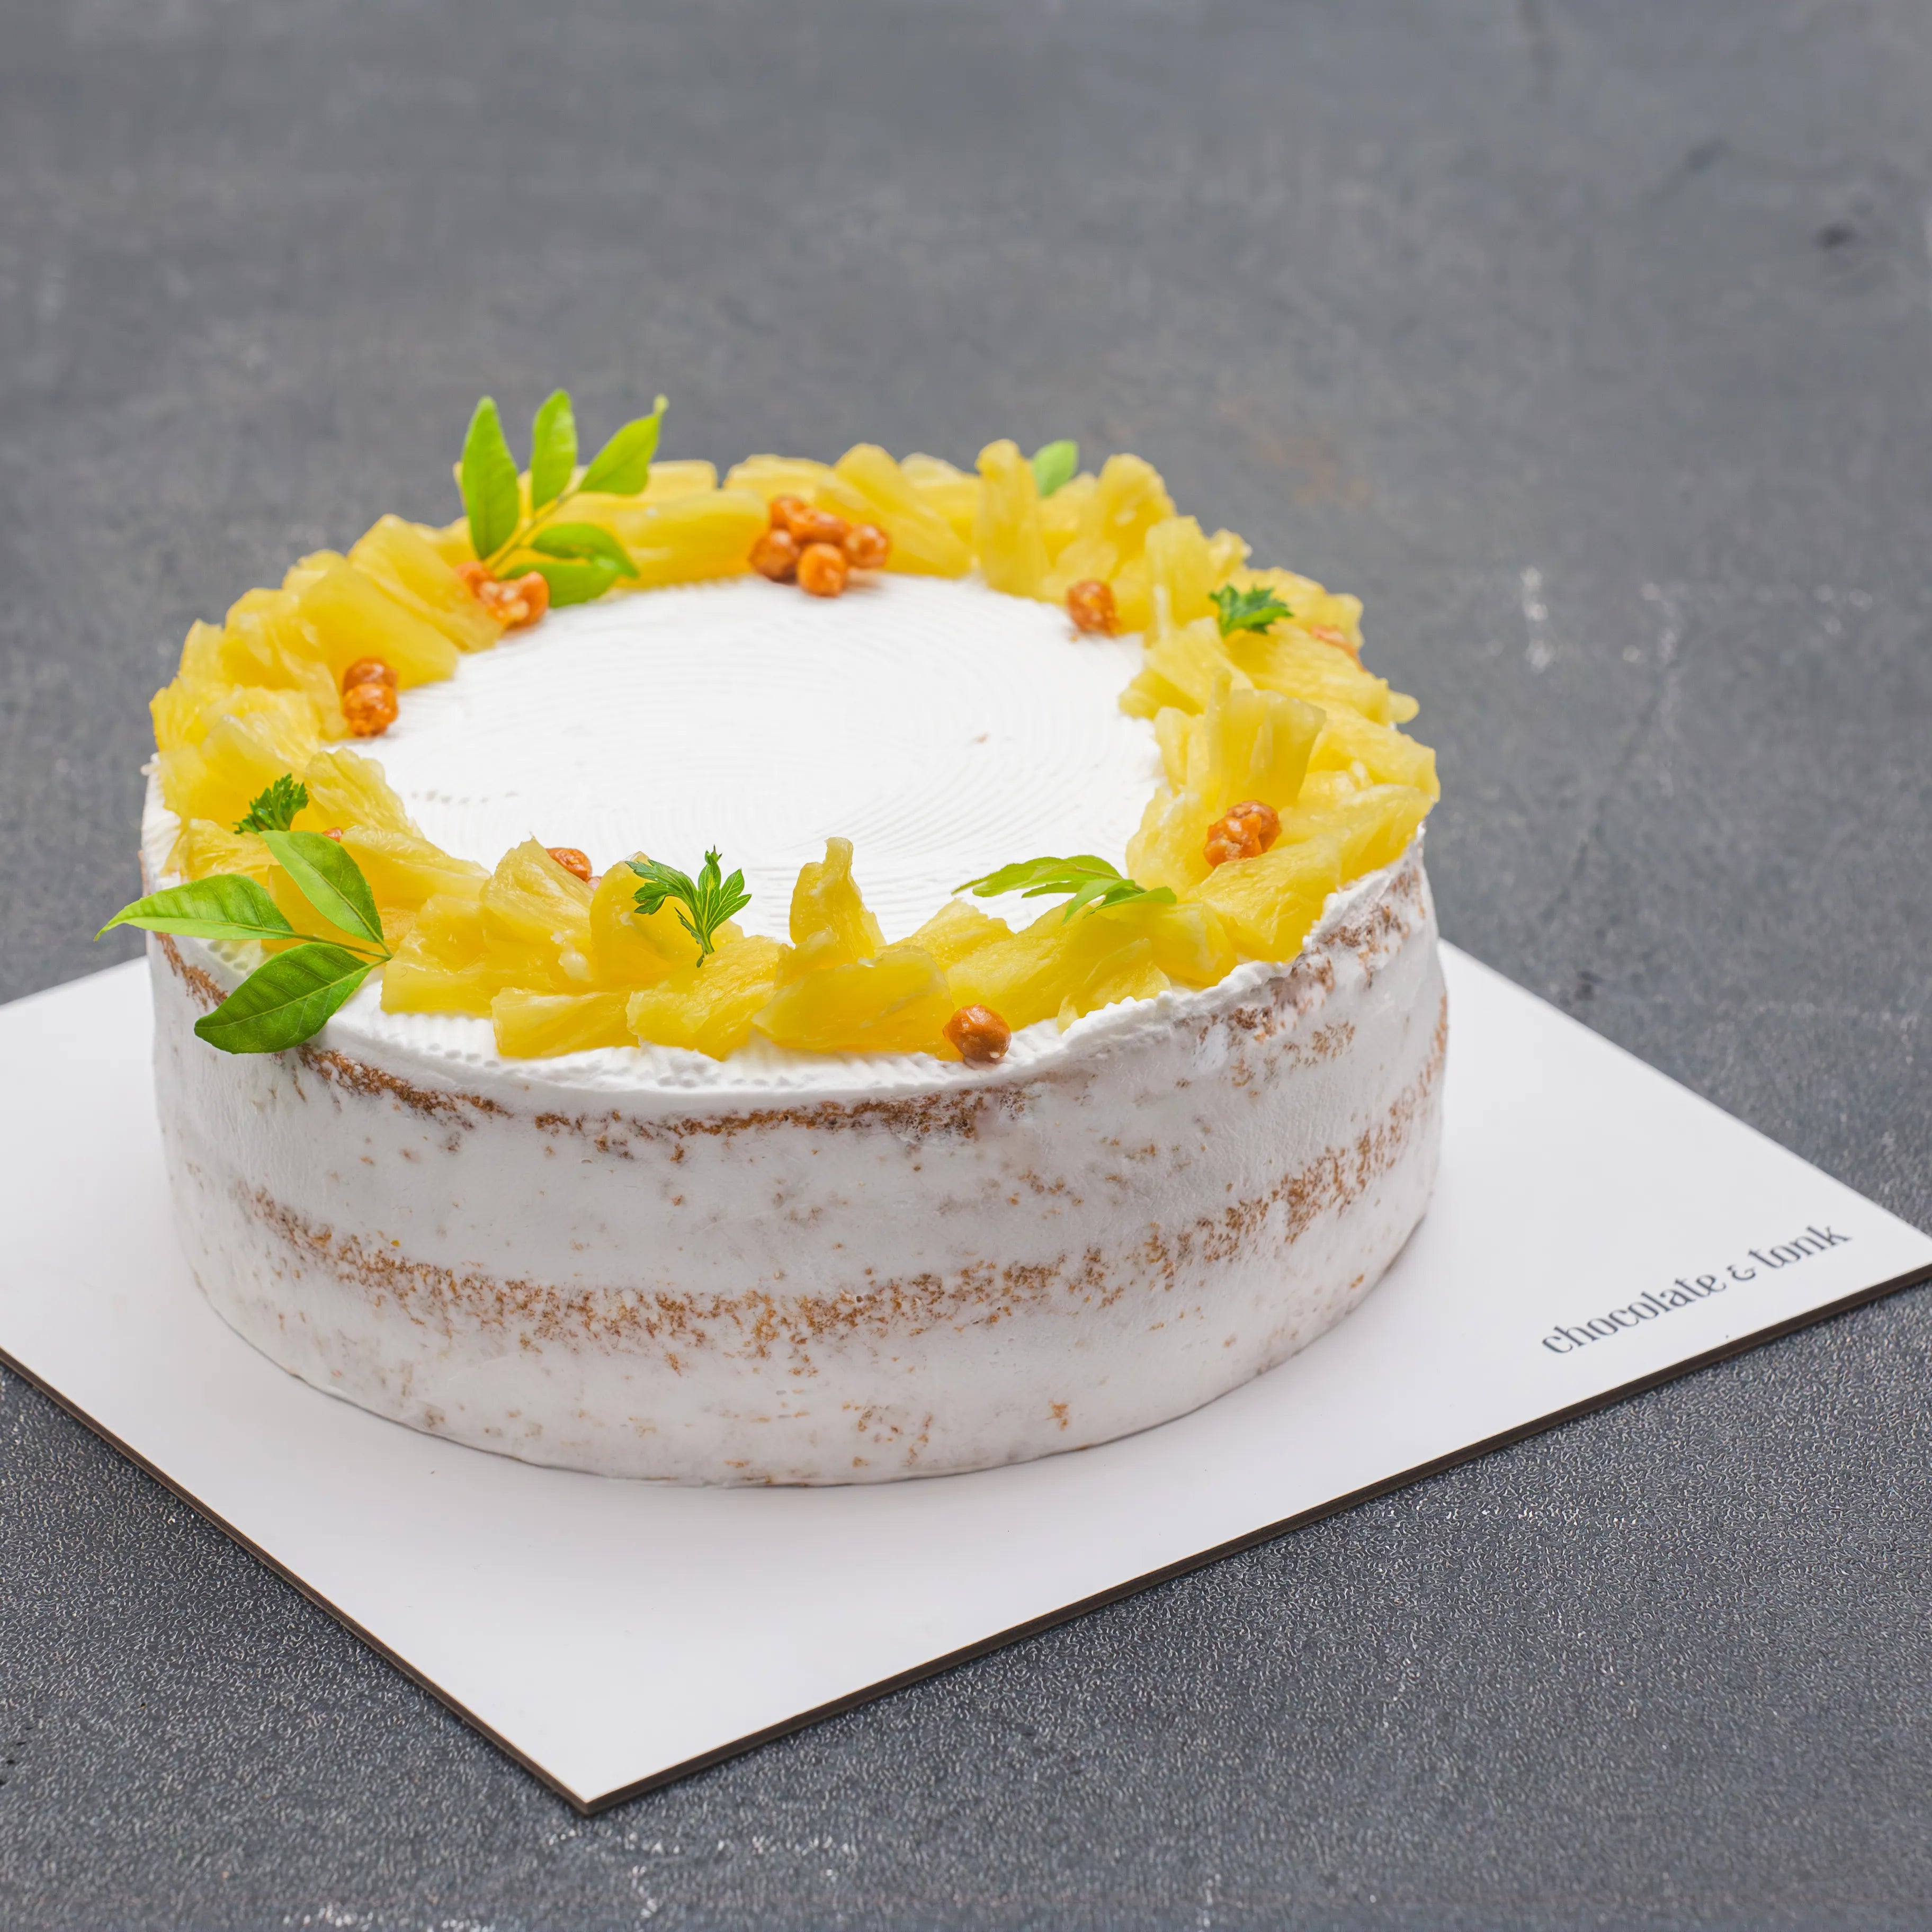 Light and fluffy pineapple cake with creamy frosting